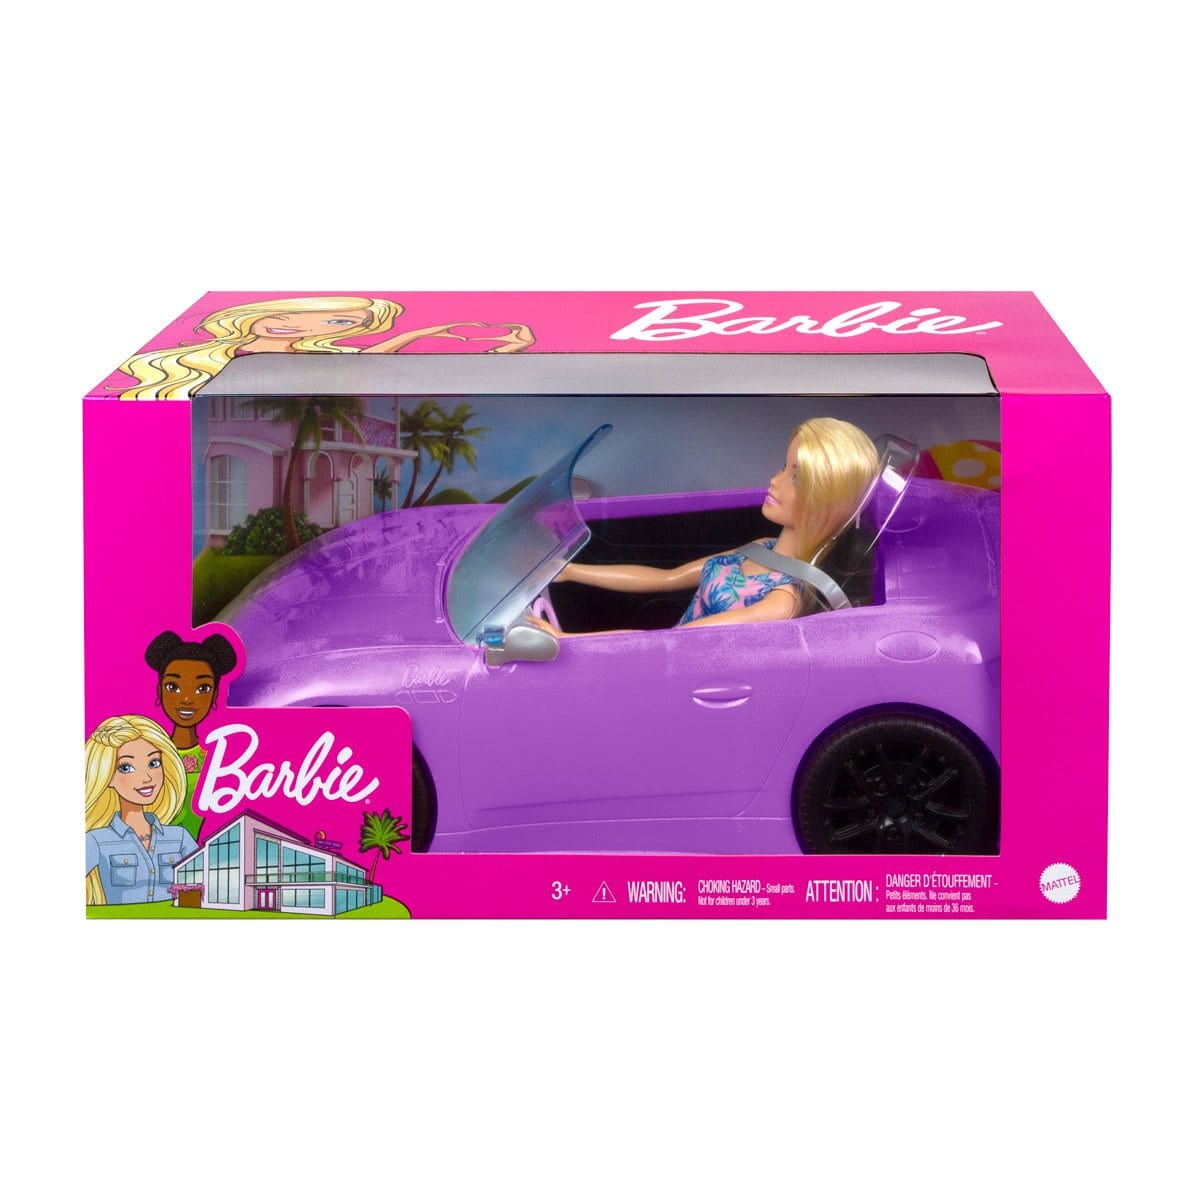 Barbie Pink Convertible 2-Seater Vehicle with Rolling Wheels and Barbie Doll with Flower Dress included